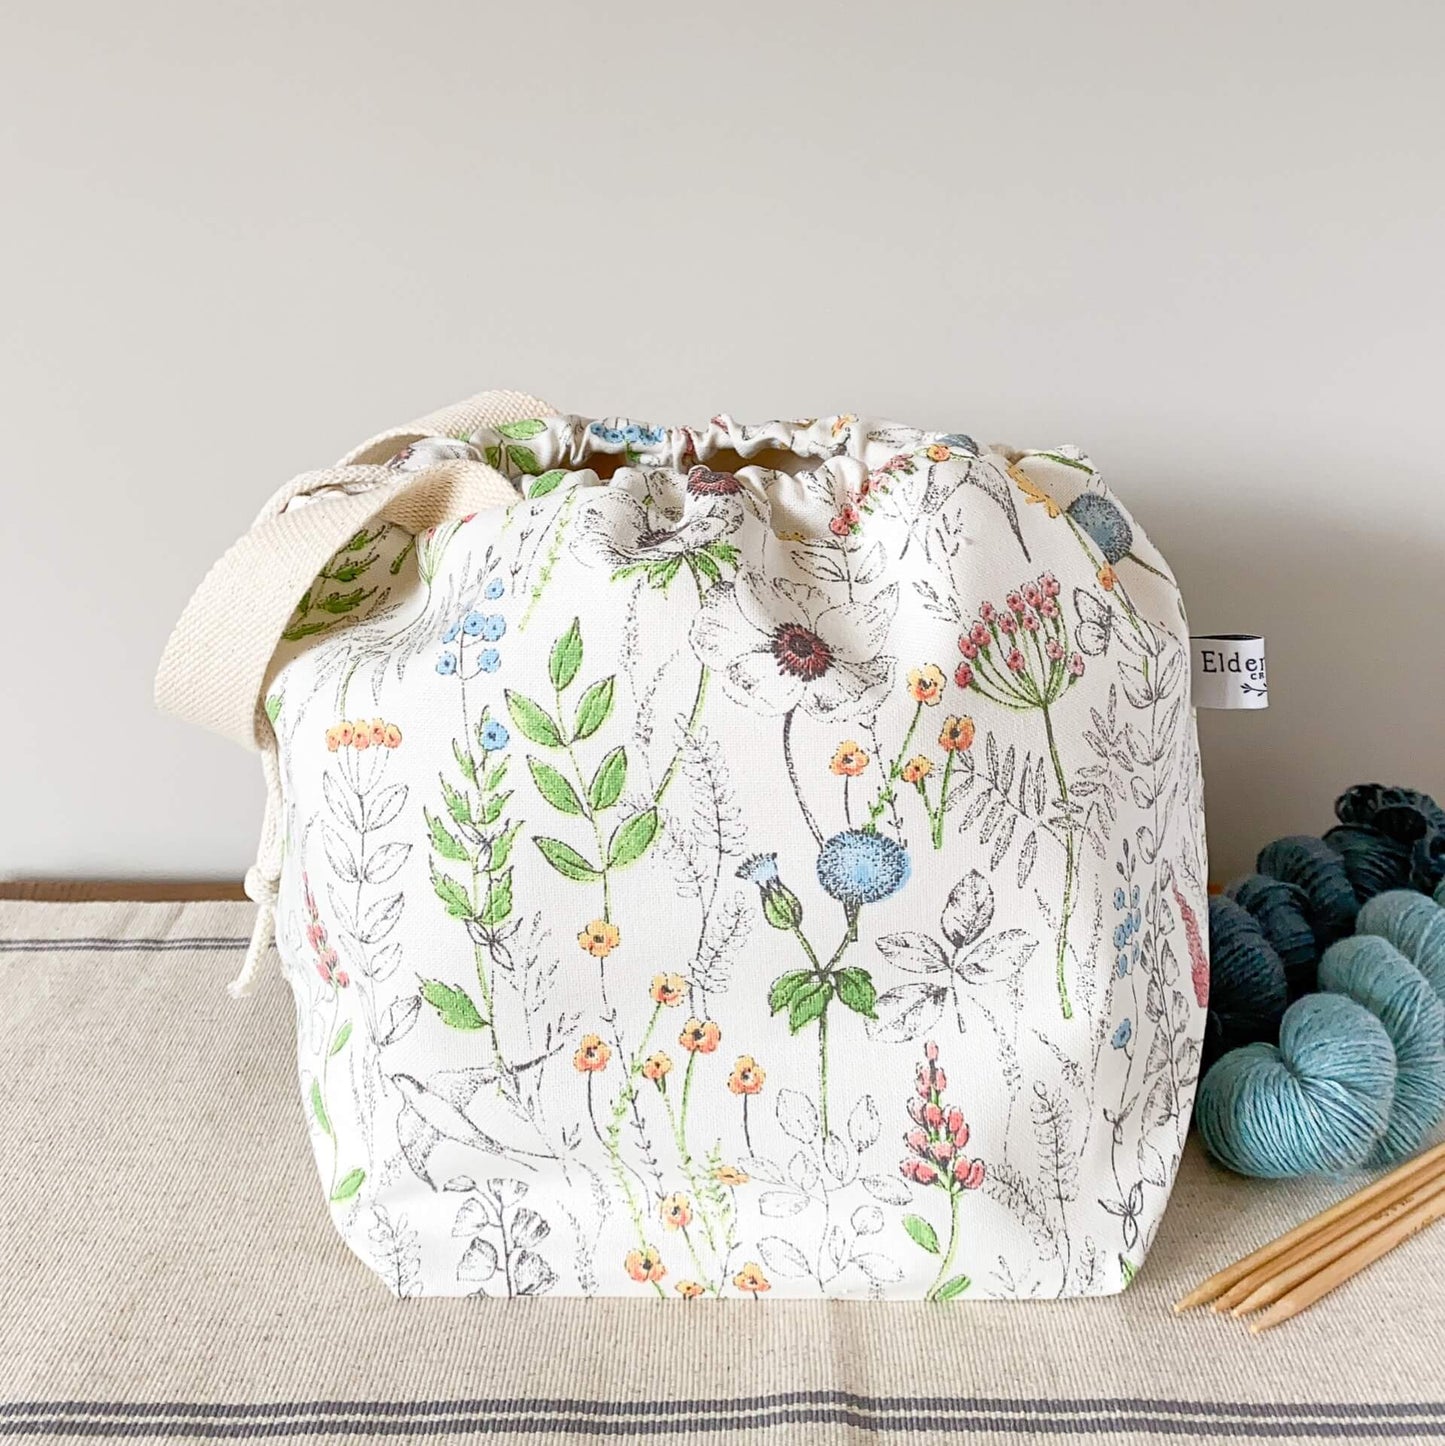 A summery project bag that features lots of wild flowers, birds and butterflies, sits on a table next to some skeins of yarn and a set of wooden knitting needles. The bag is pulled closed by a drawstring hiding its contents. 